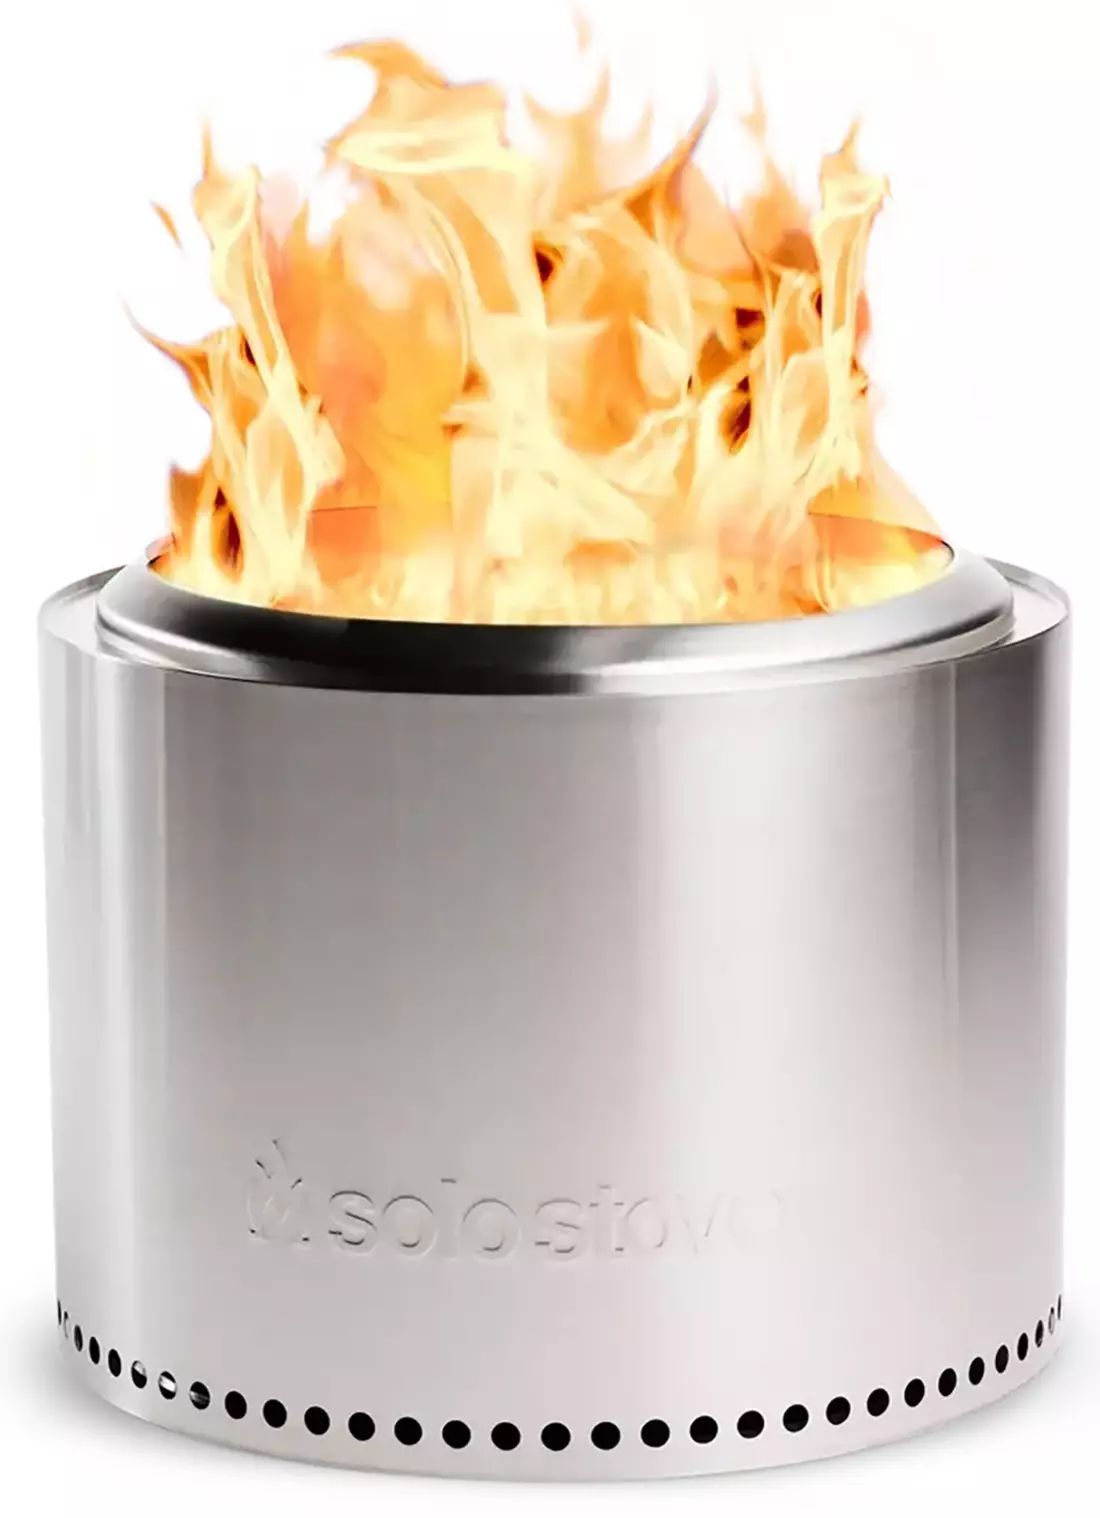 Solo Stove Bonfire - Now $239.98 | DICK'S Sporting Goods | Dick's Sporting Goods